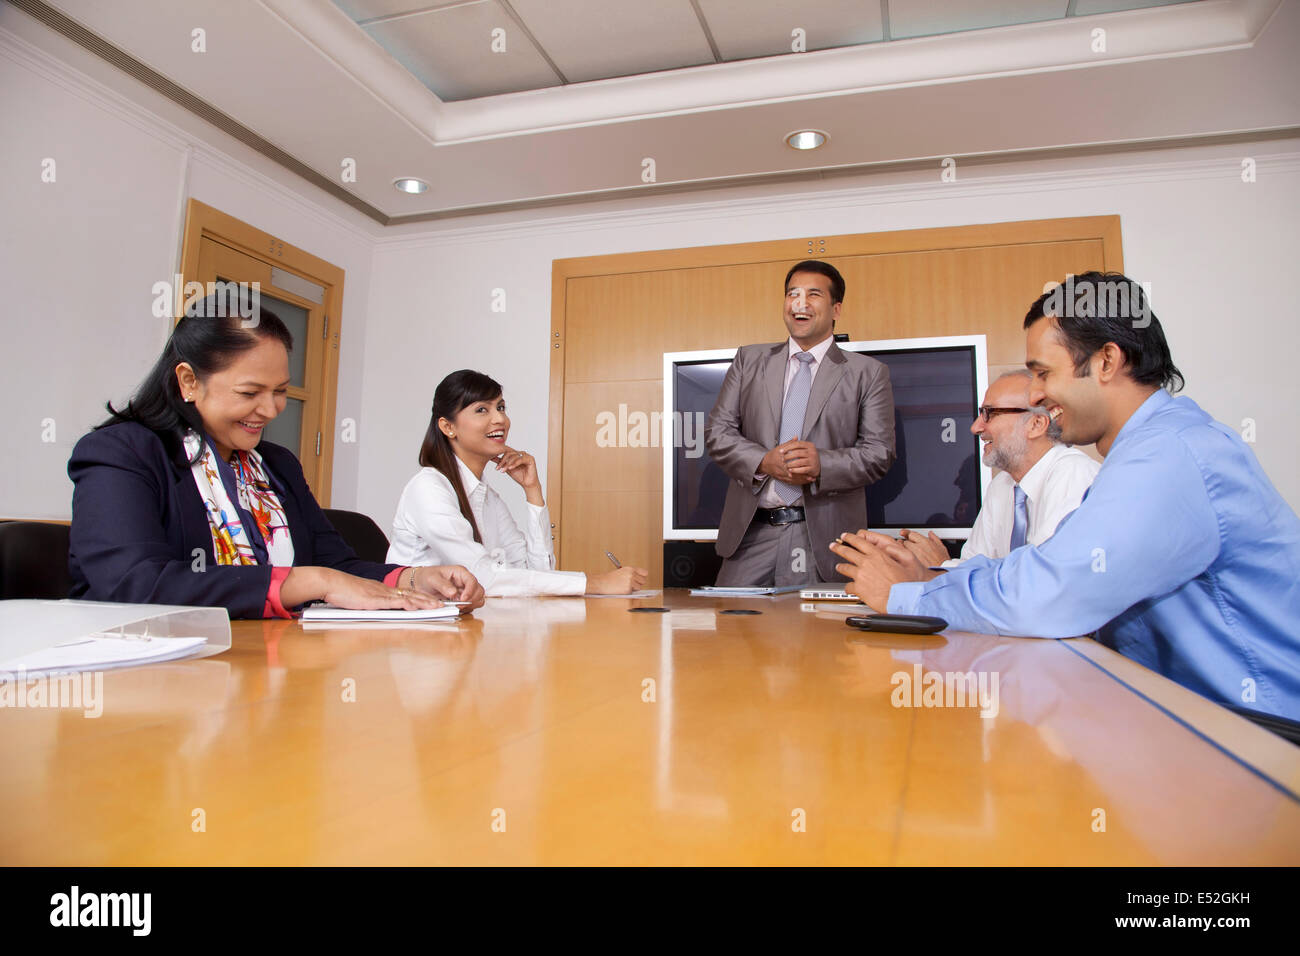 Business executives having a laugh during a meeting Stock Photo